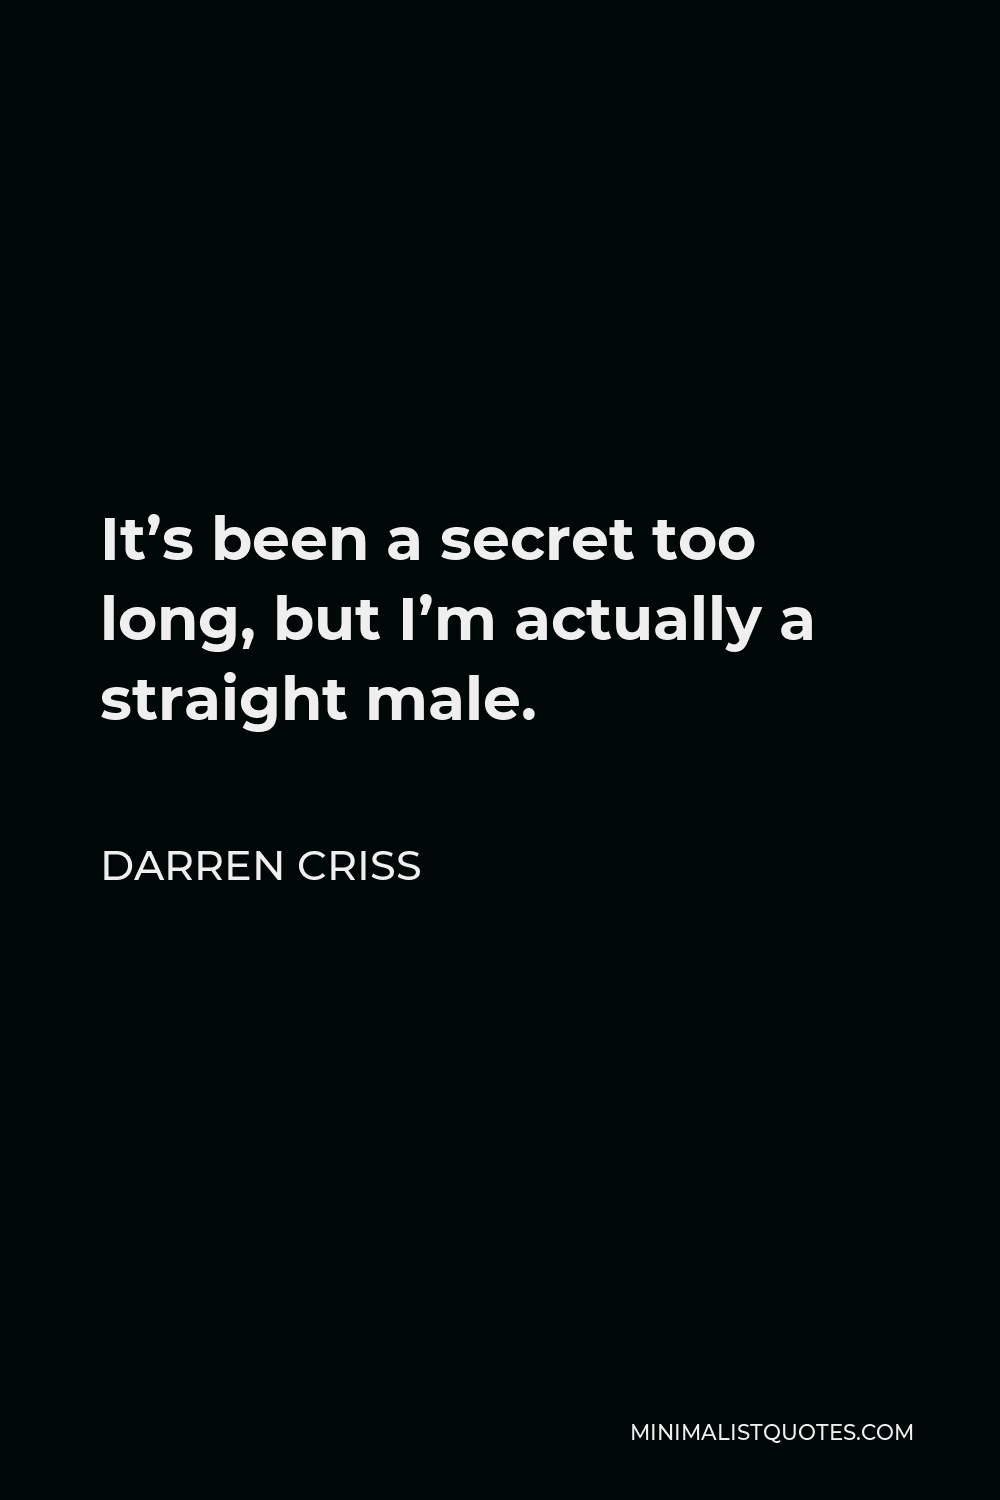 Darren Criss Quote - It’s been a secret too long, but I’m actually a straight male.